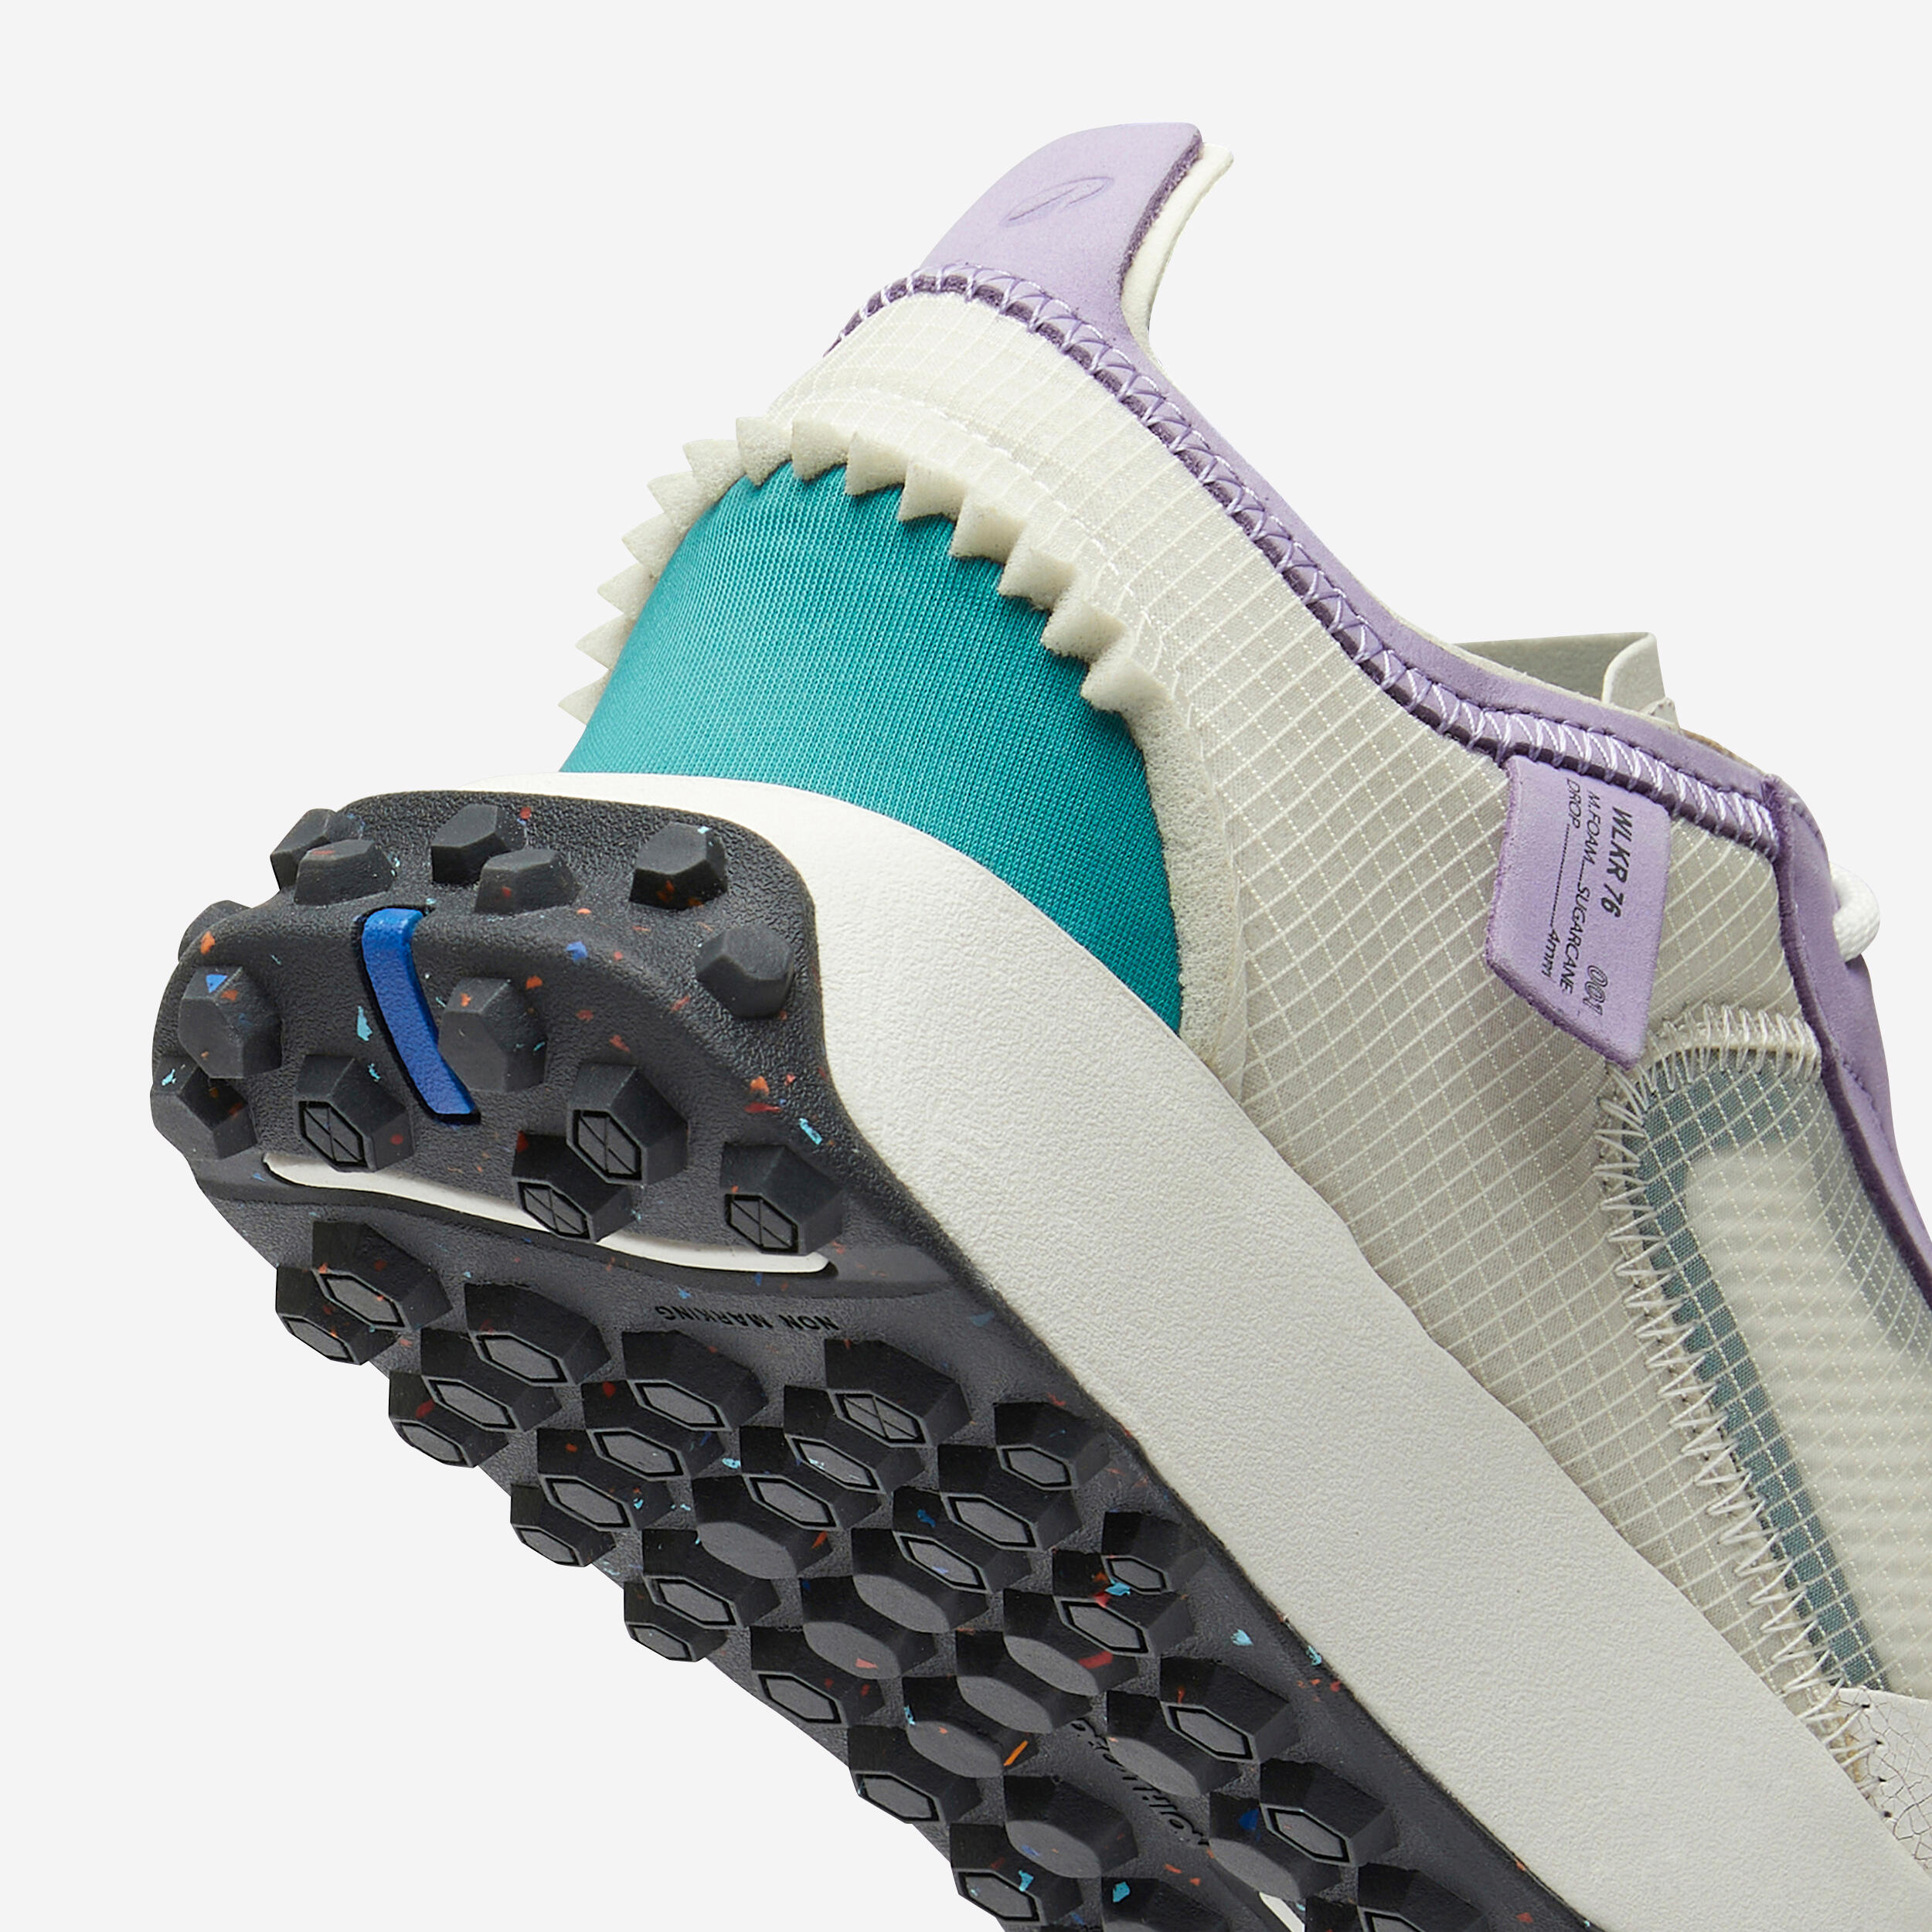 WLKR 76 Trainers-White and Purple 8/12